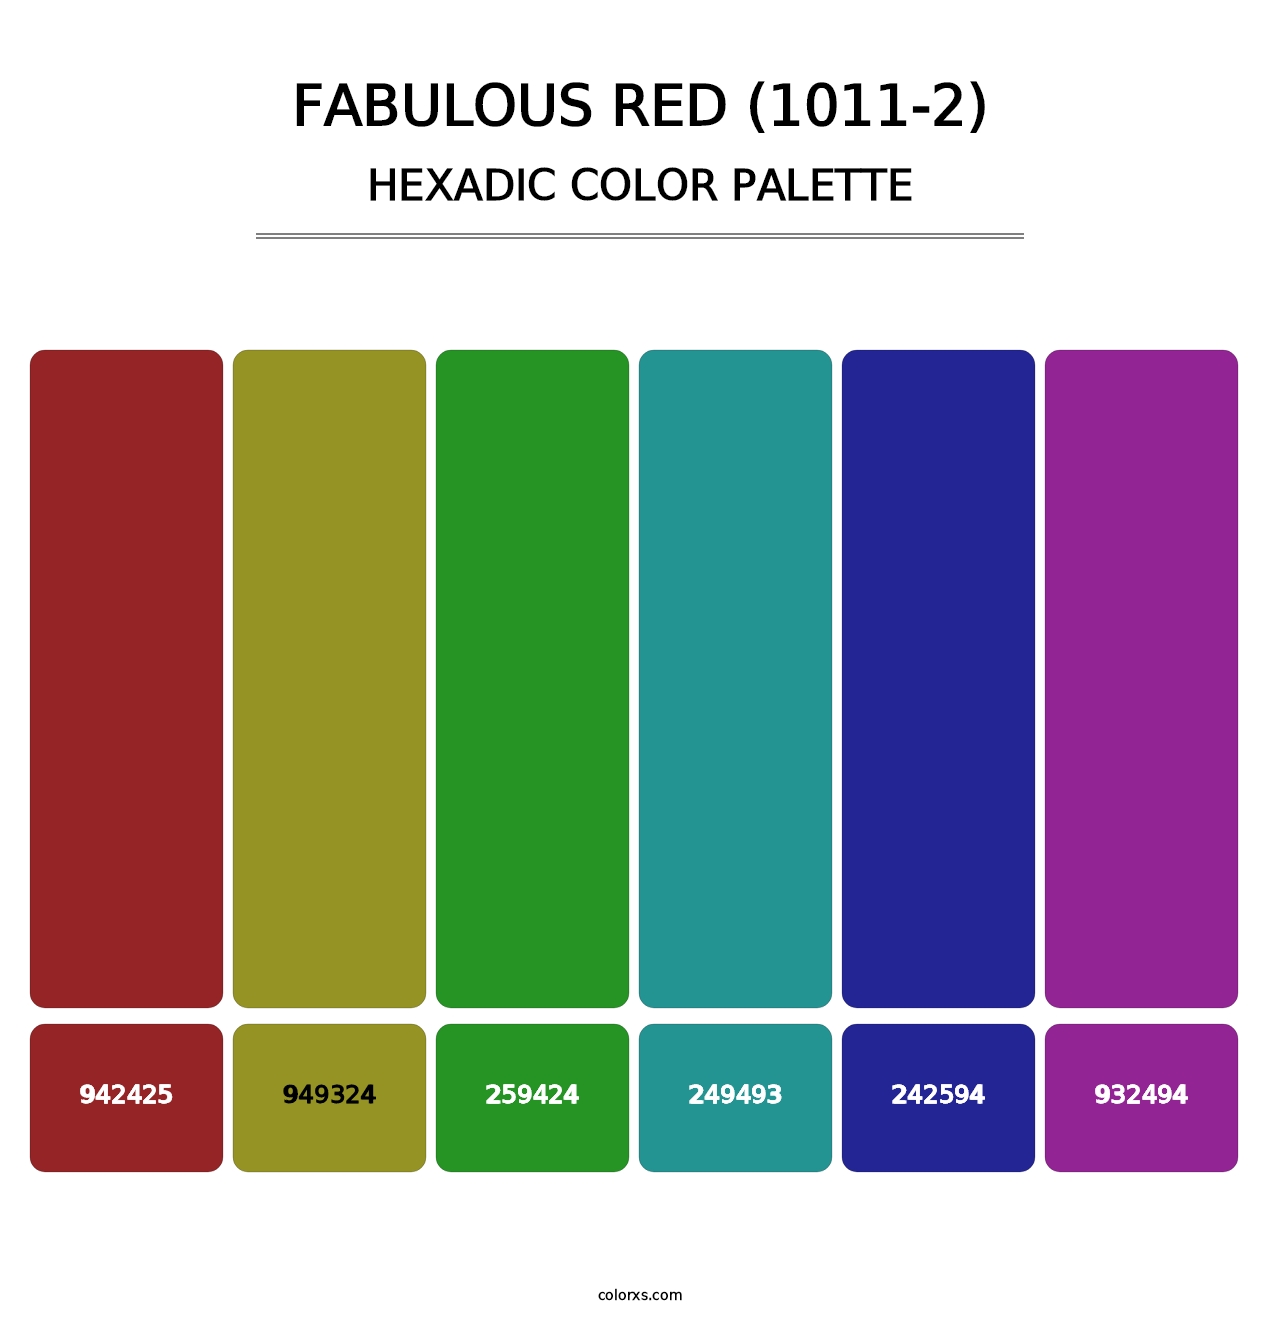 Fabulous Red (1011-2) - Hexadic Color Palette